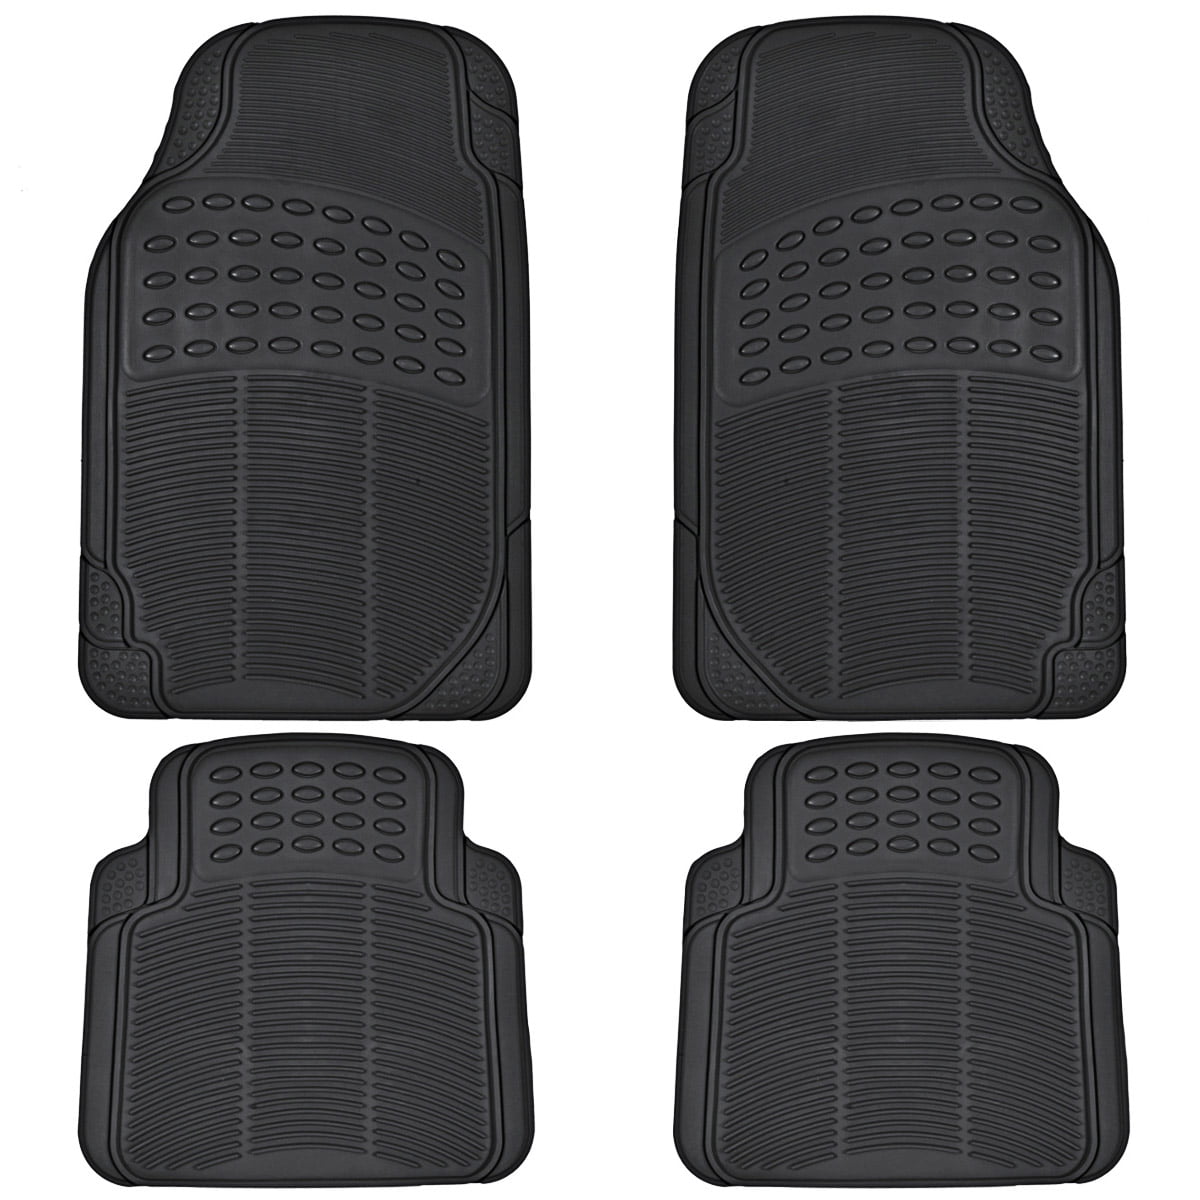 Car Floor Mats for All Weather Semi Custom Fit Heavy Duty Trimmable Beige 3PC 